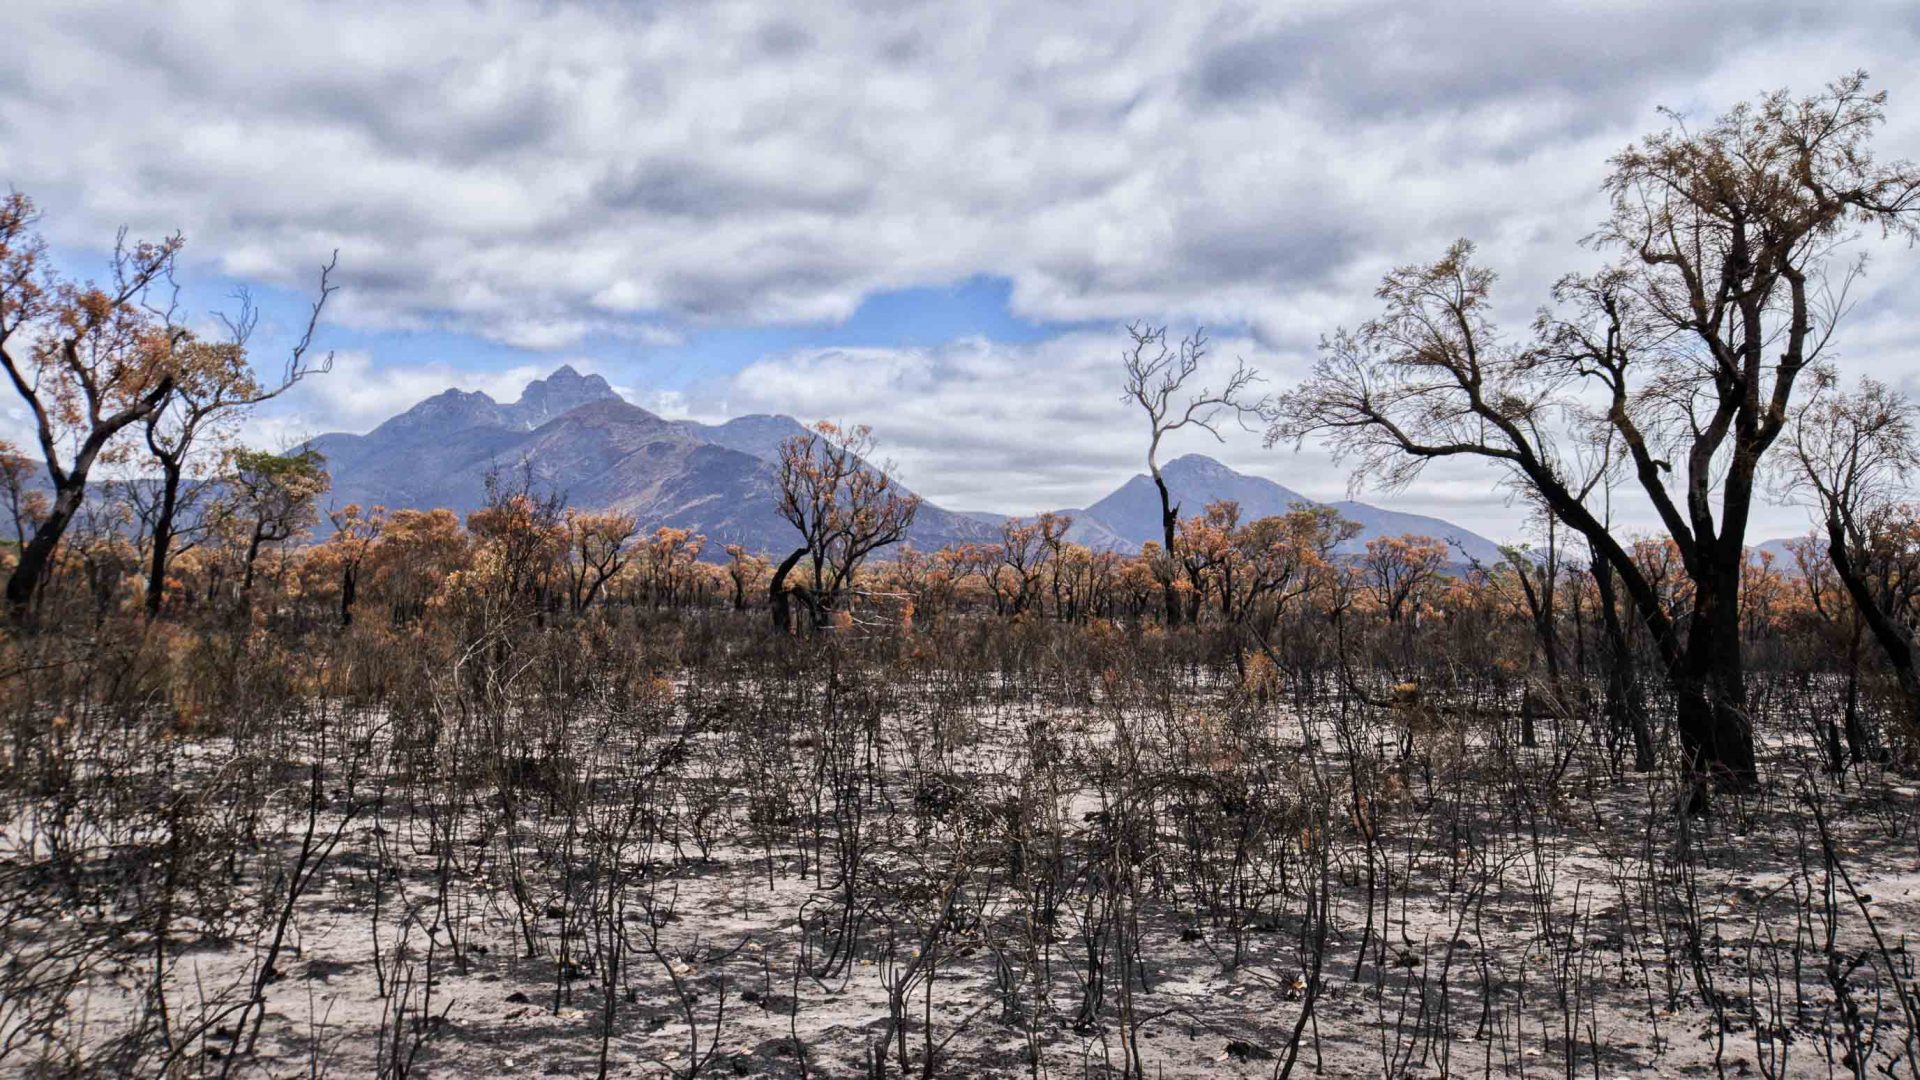 The scorched Australian landscape after a fire has swept through.